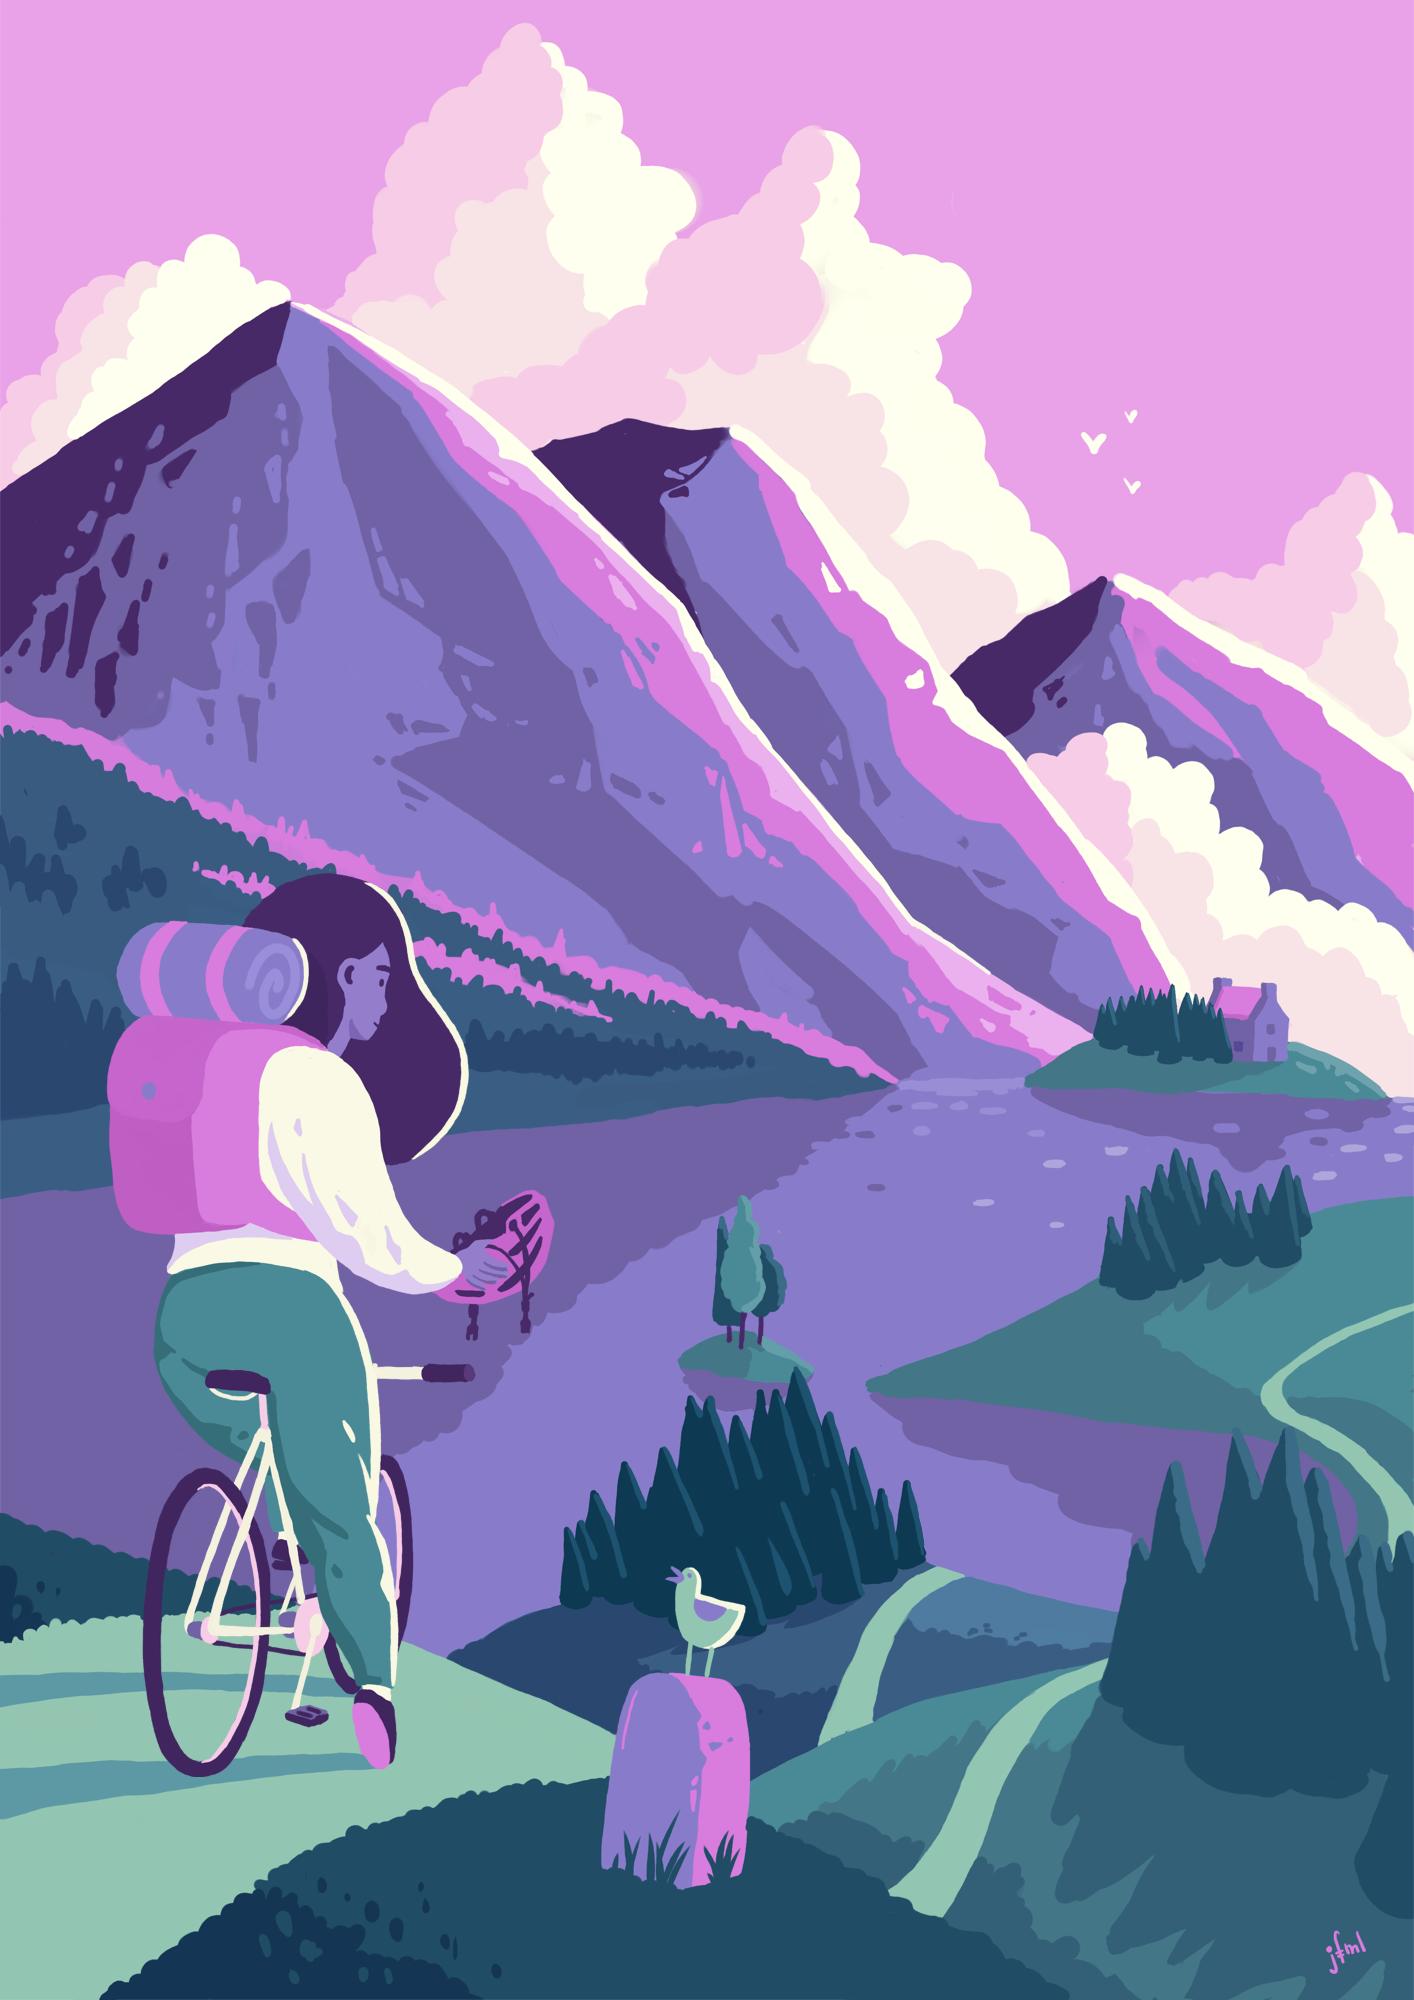 Illustration in greens and pinks of a person taking a brake from cycling the rather steep climbs in a Scottish landscape with mountains, a loch and woodlands.